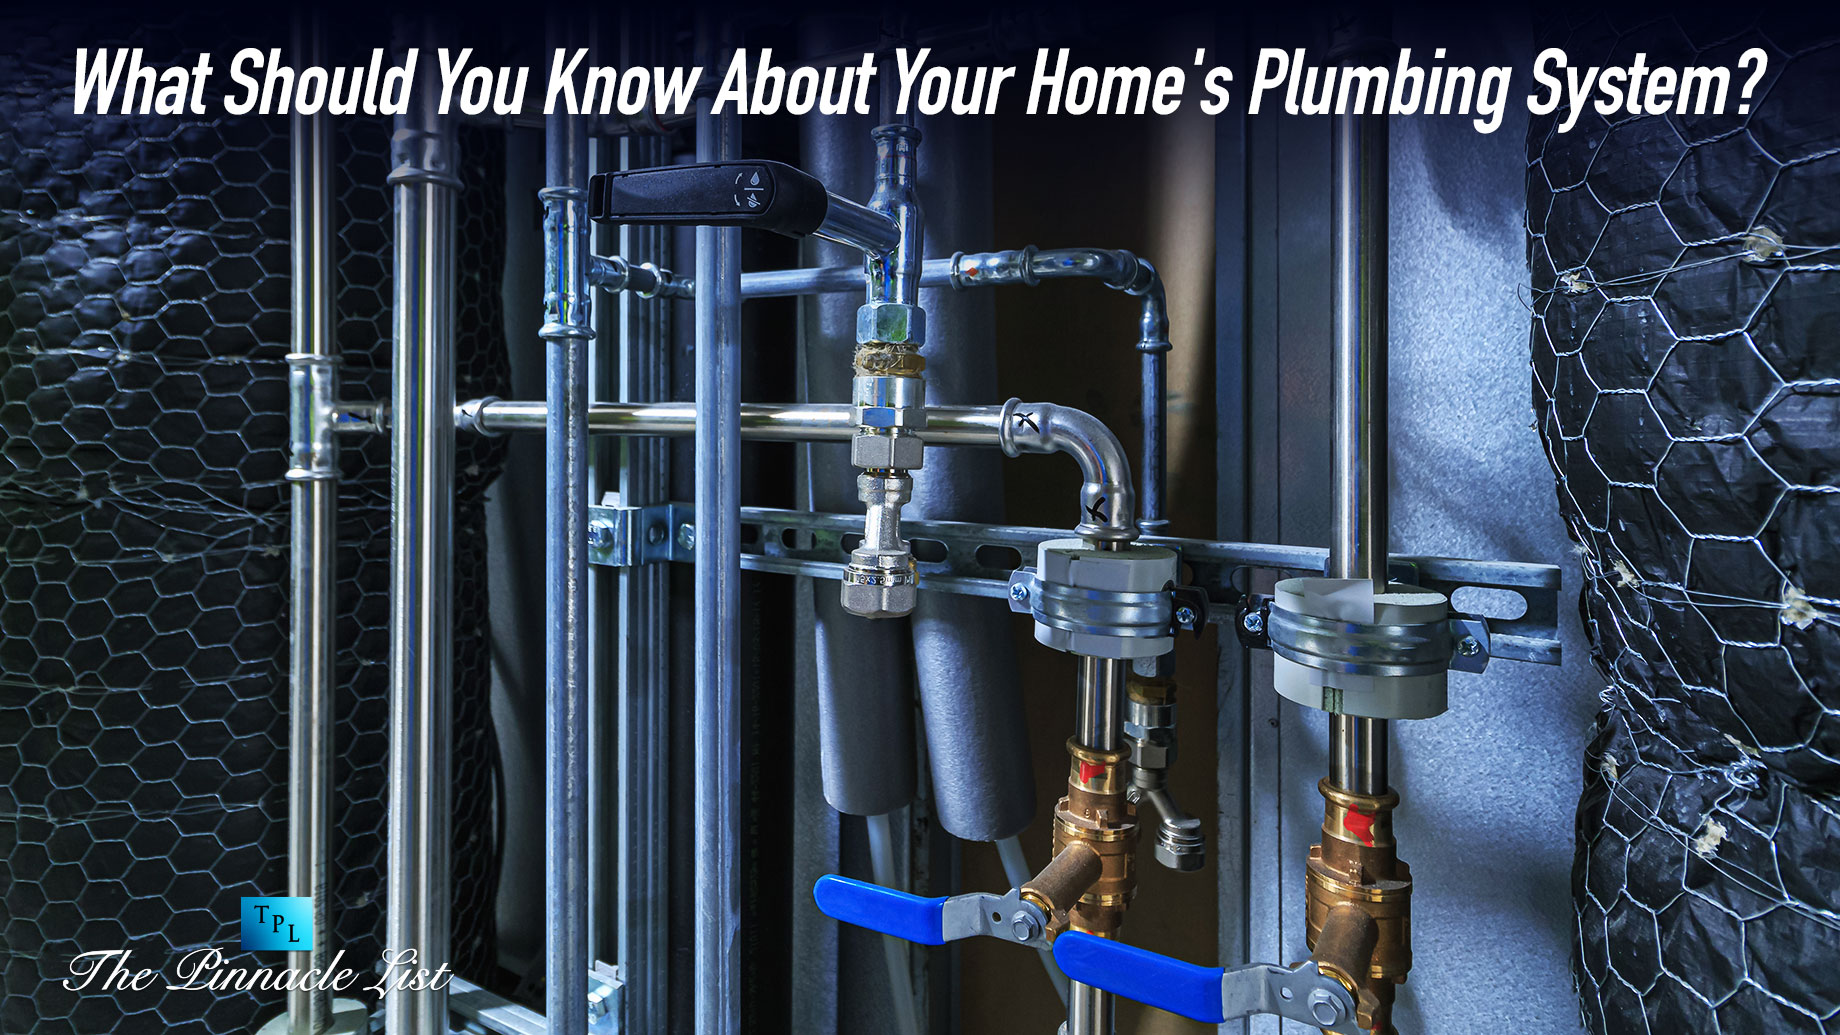 What Should You Know About Your Home's Plumbing System?